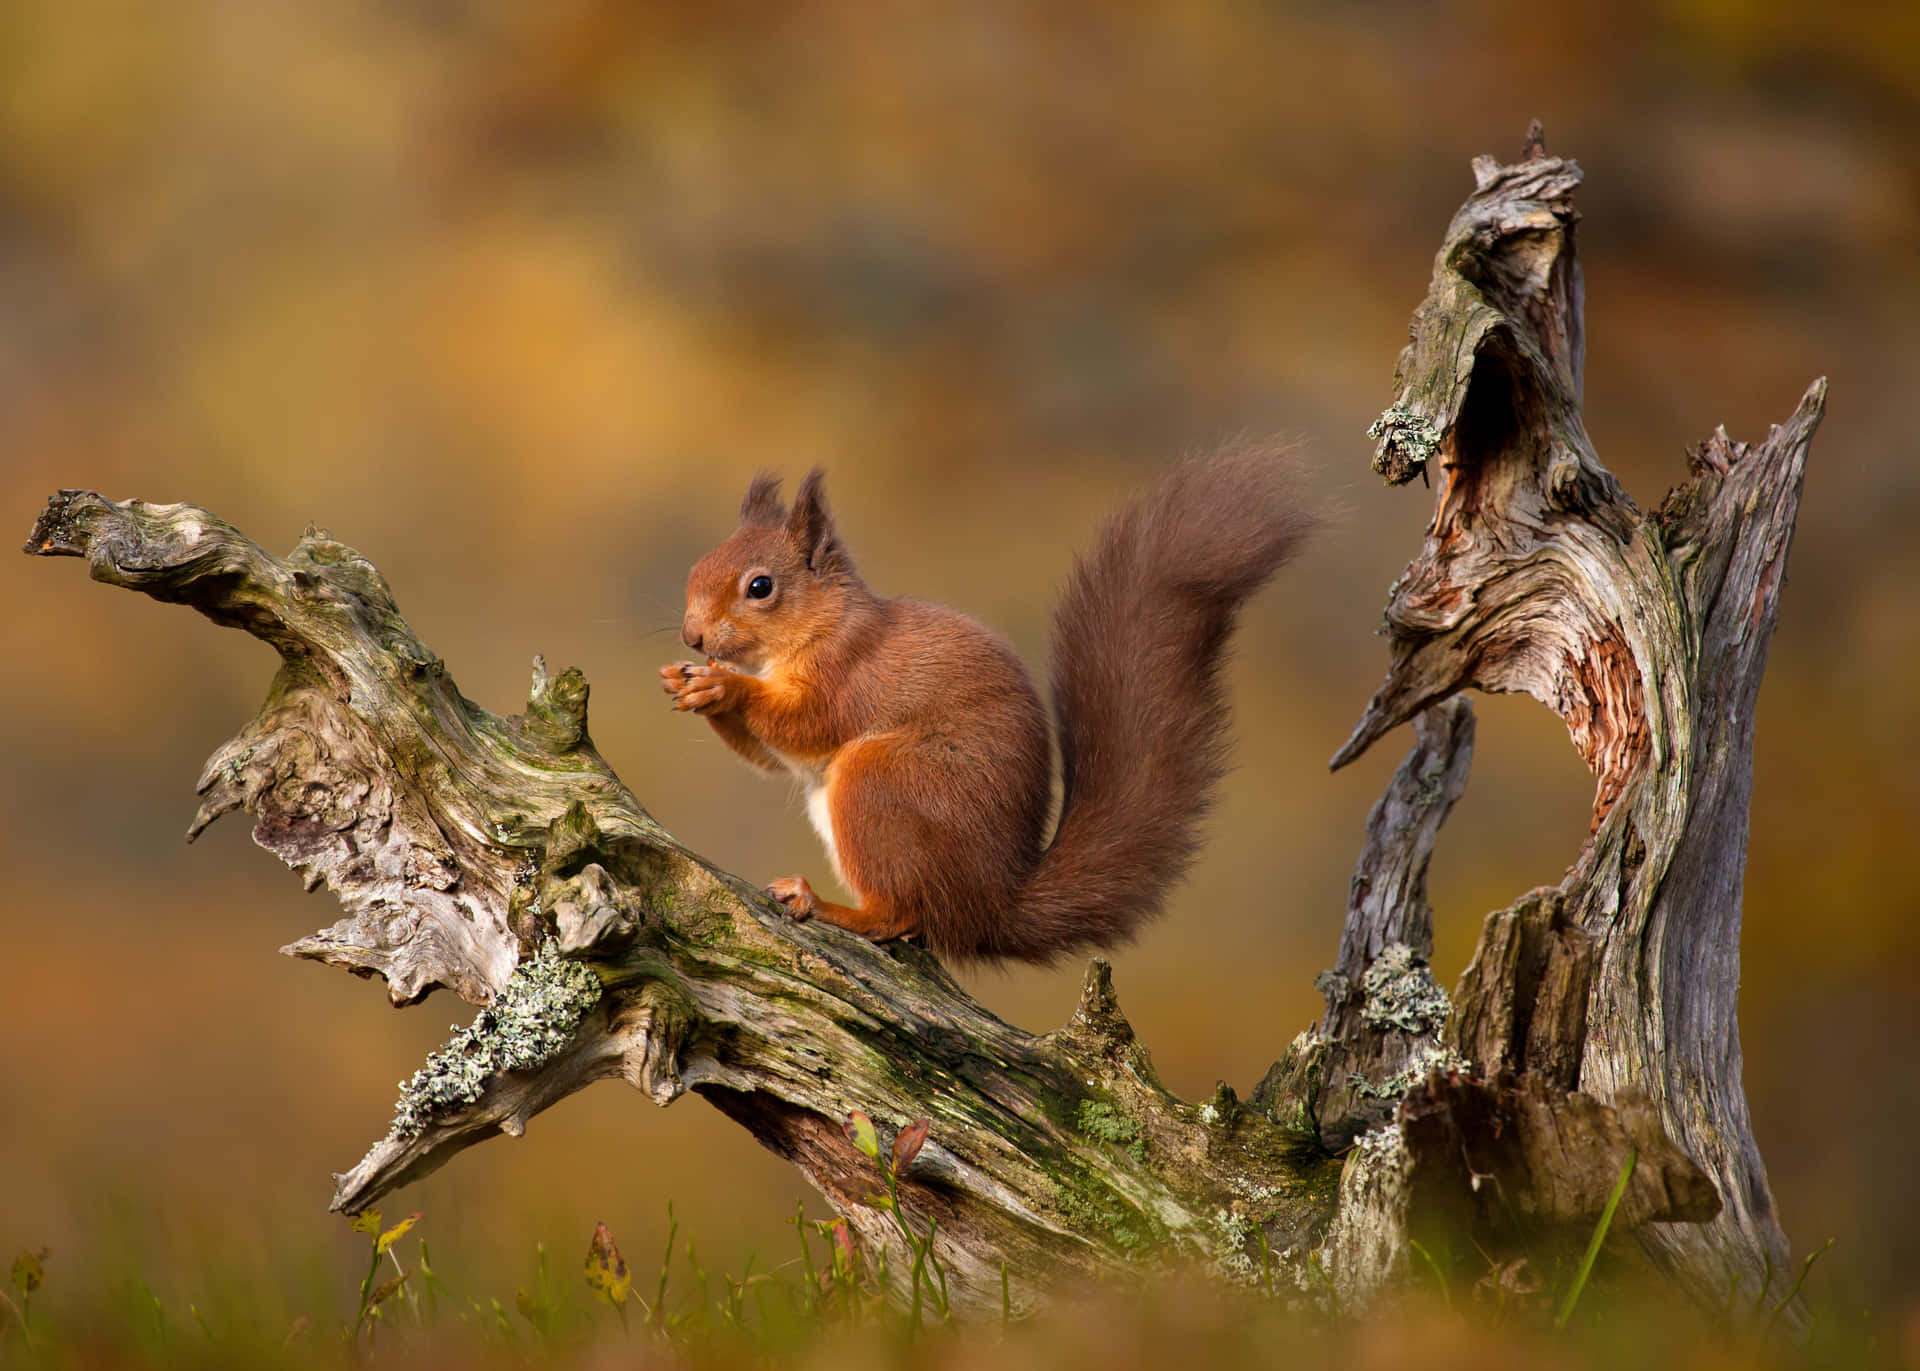 A curious red squirrel caught peeking out from behind a tree